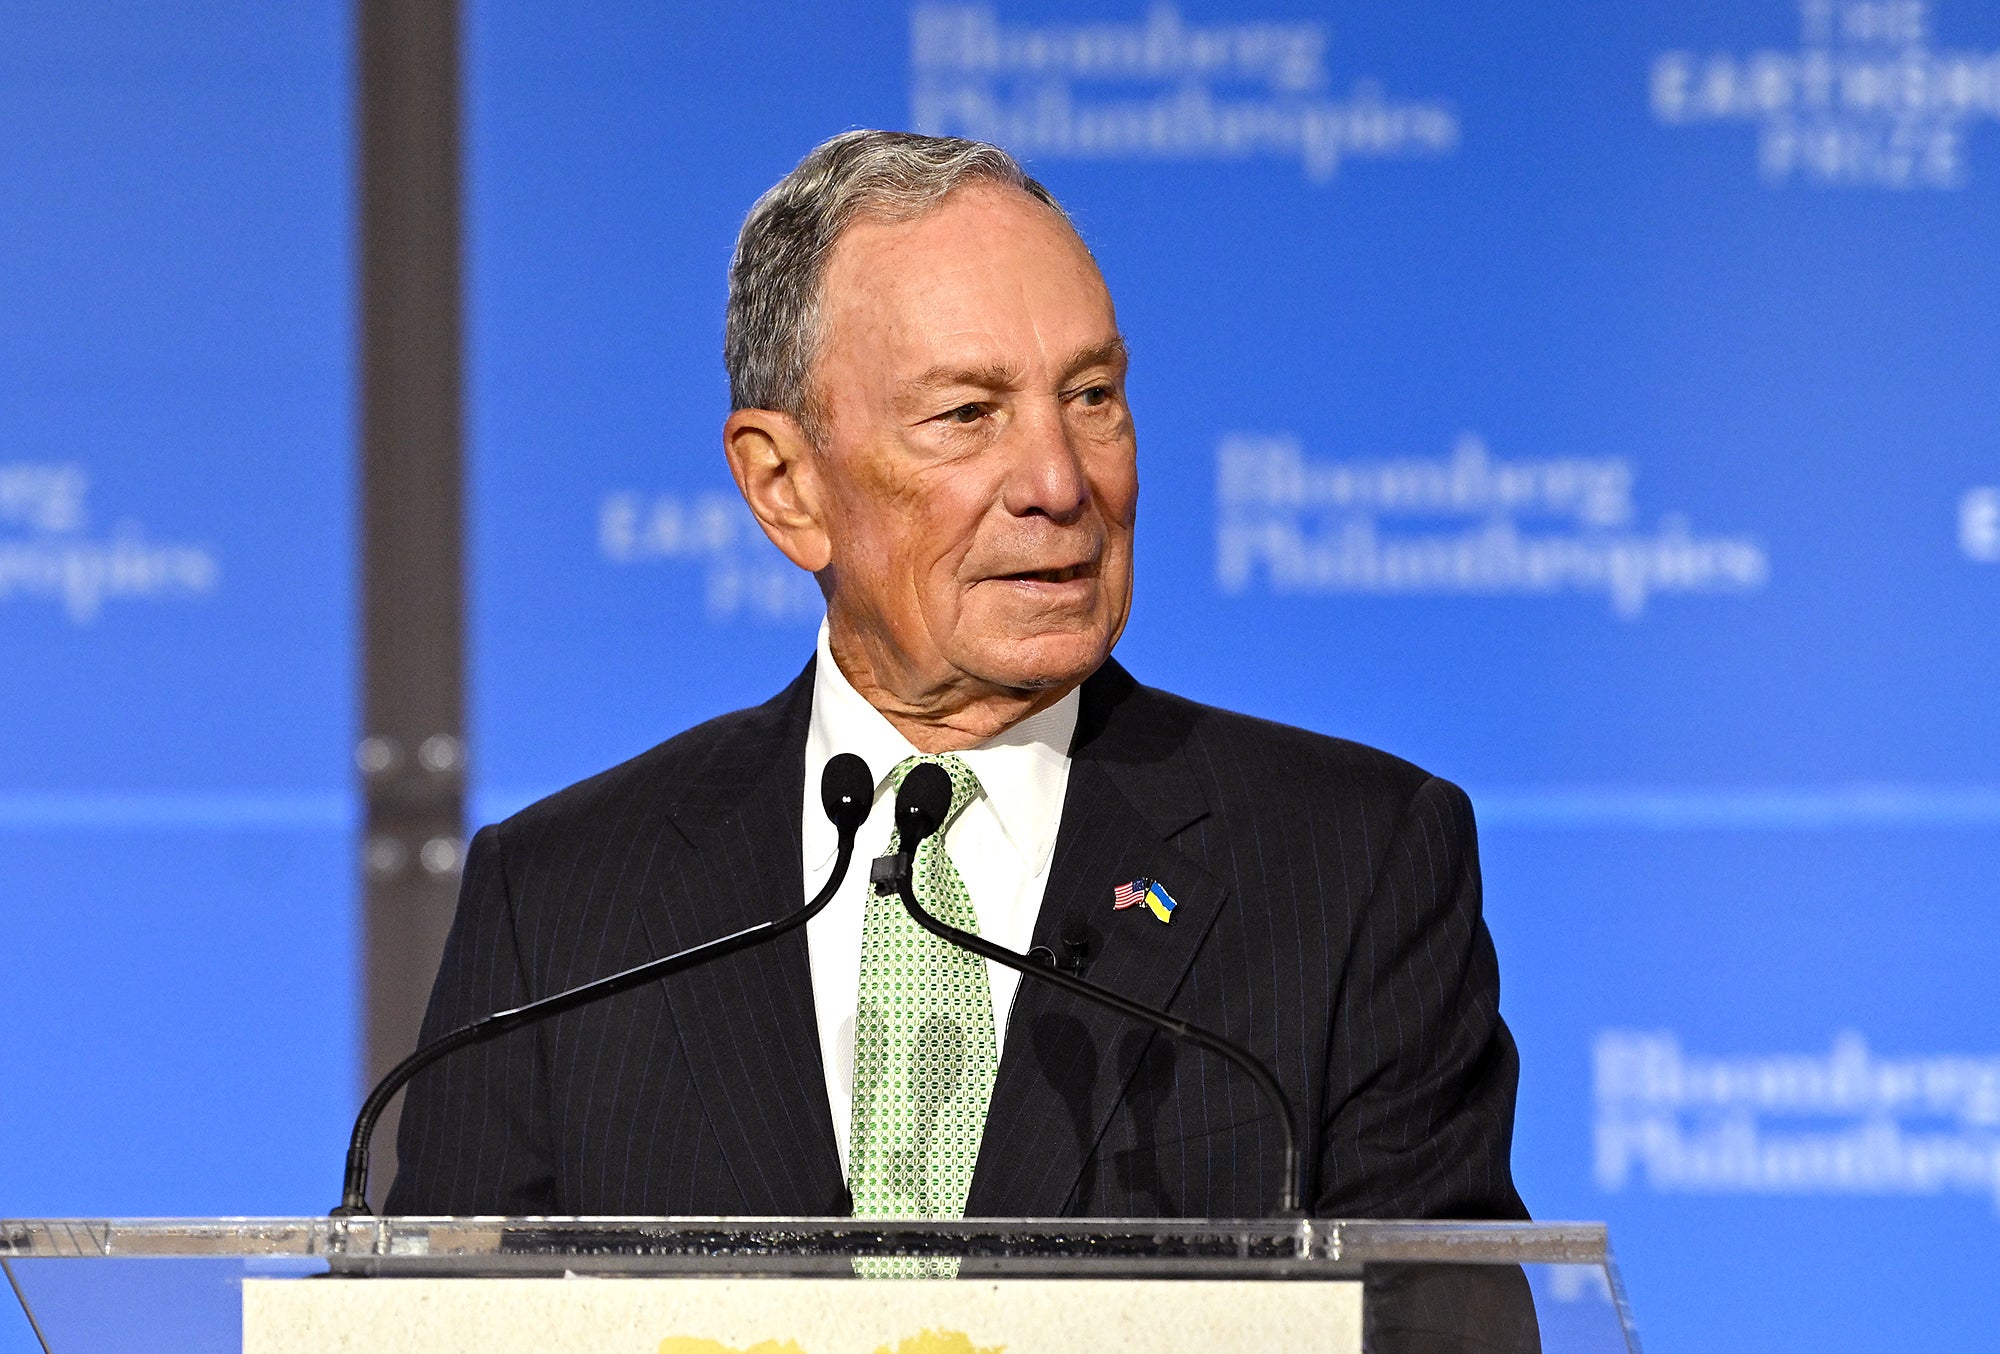 Michael R. Bloomberg speaks onstage at a podium with a blue background